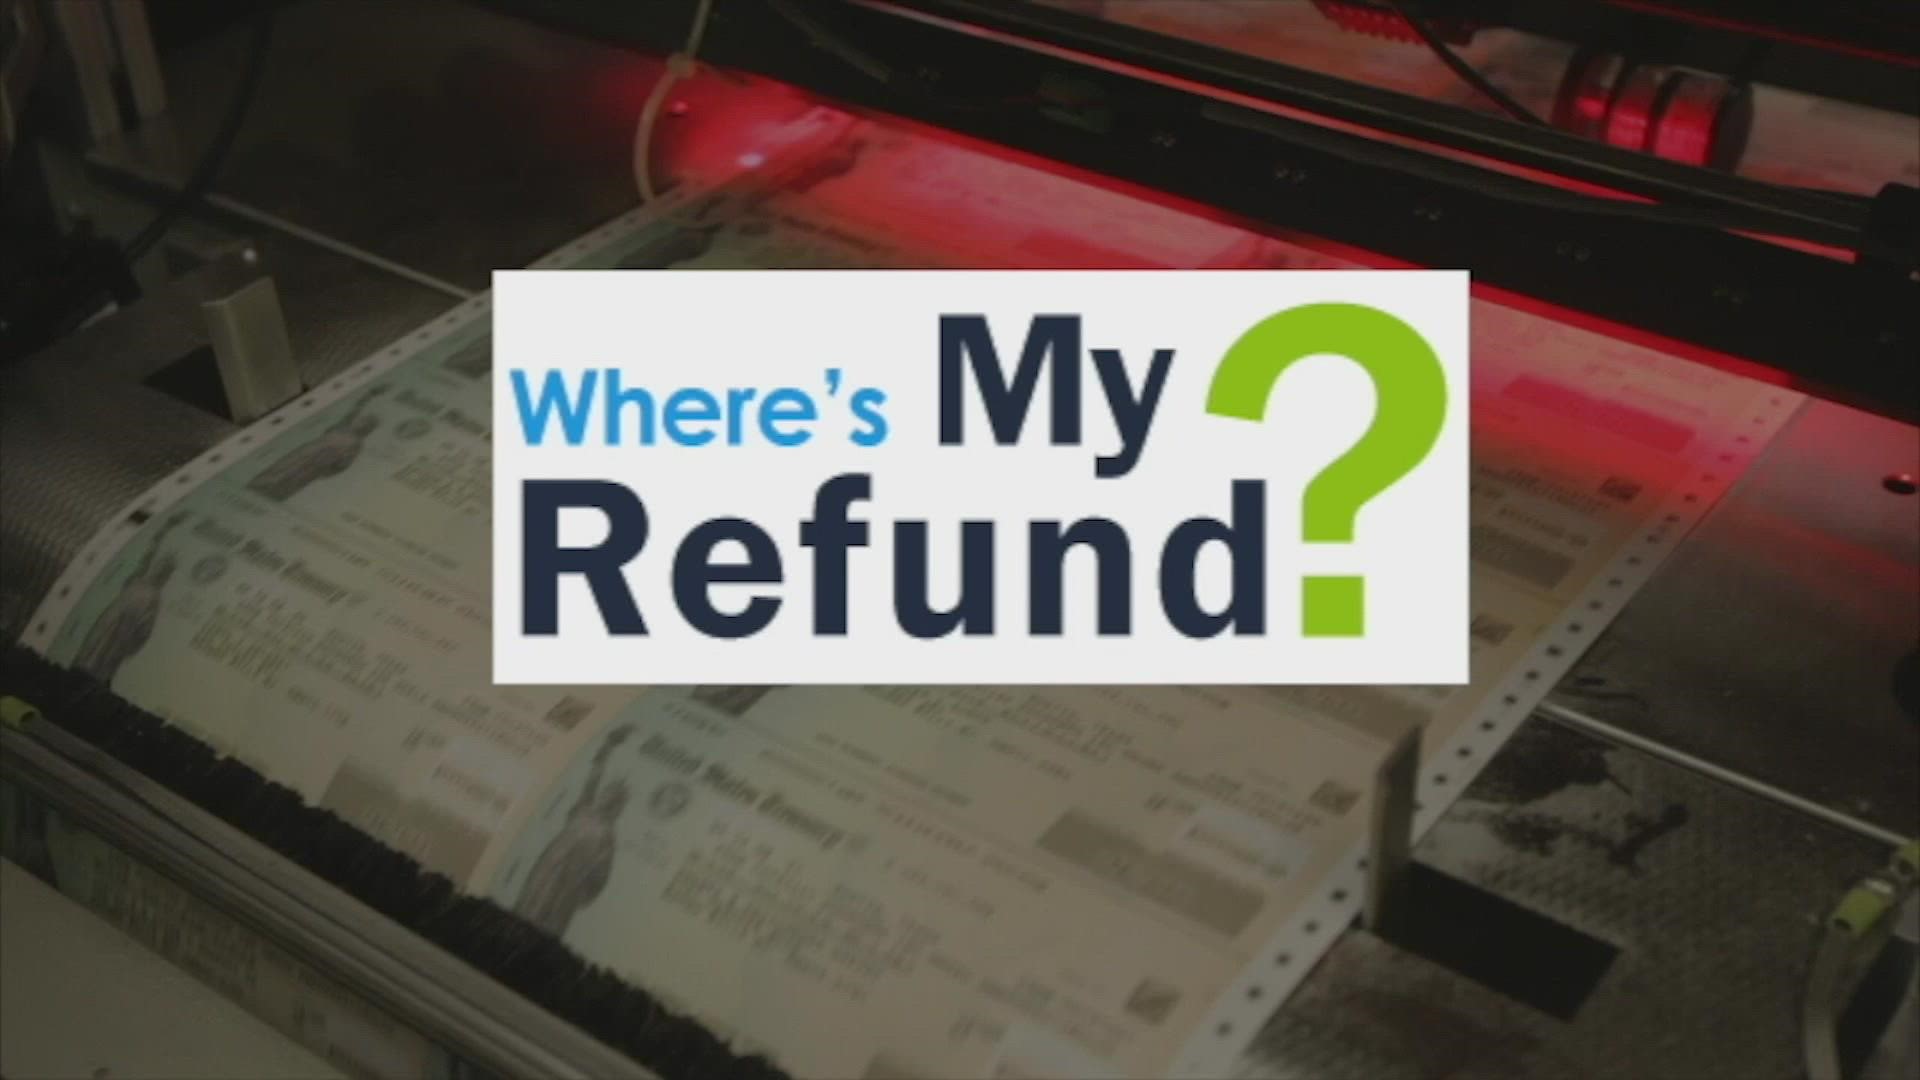 Consumer reporter John Matarese looks into big delays trying to get refund money